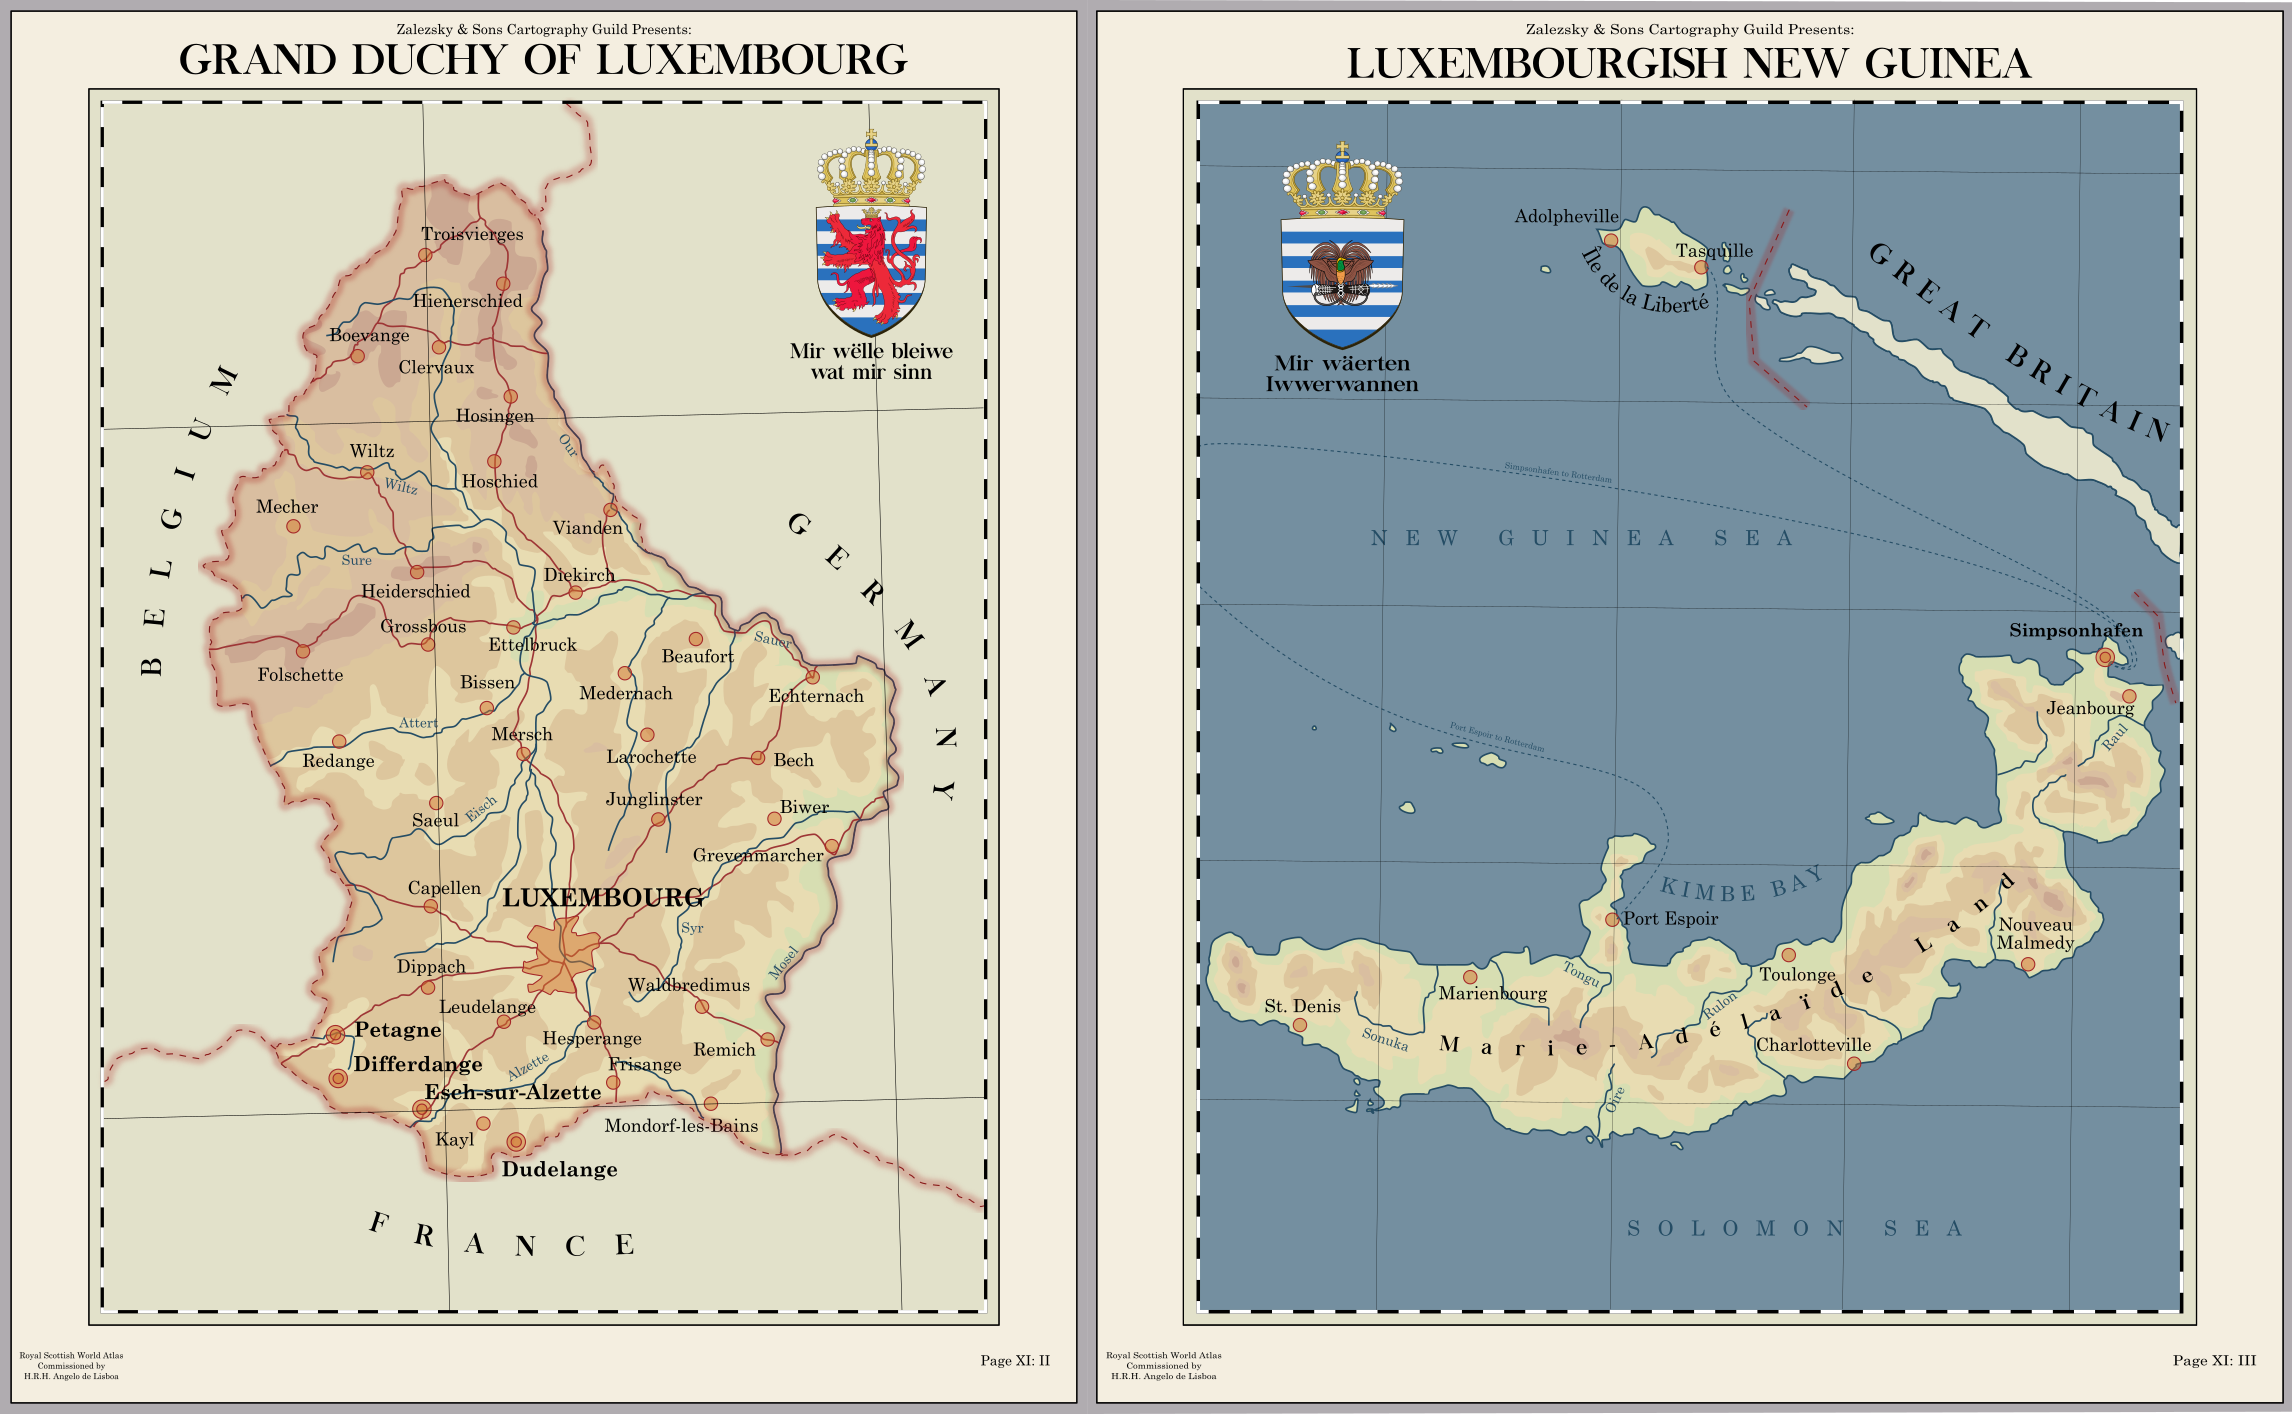 luxembourg__the_implausible_colonizer_by_zalezsky-db7suhk.png